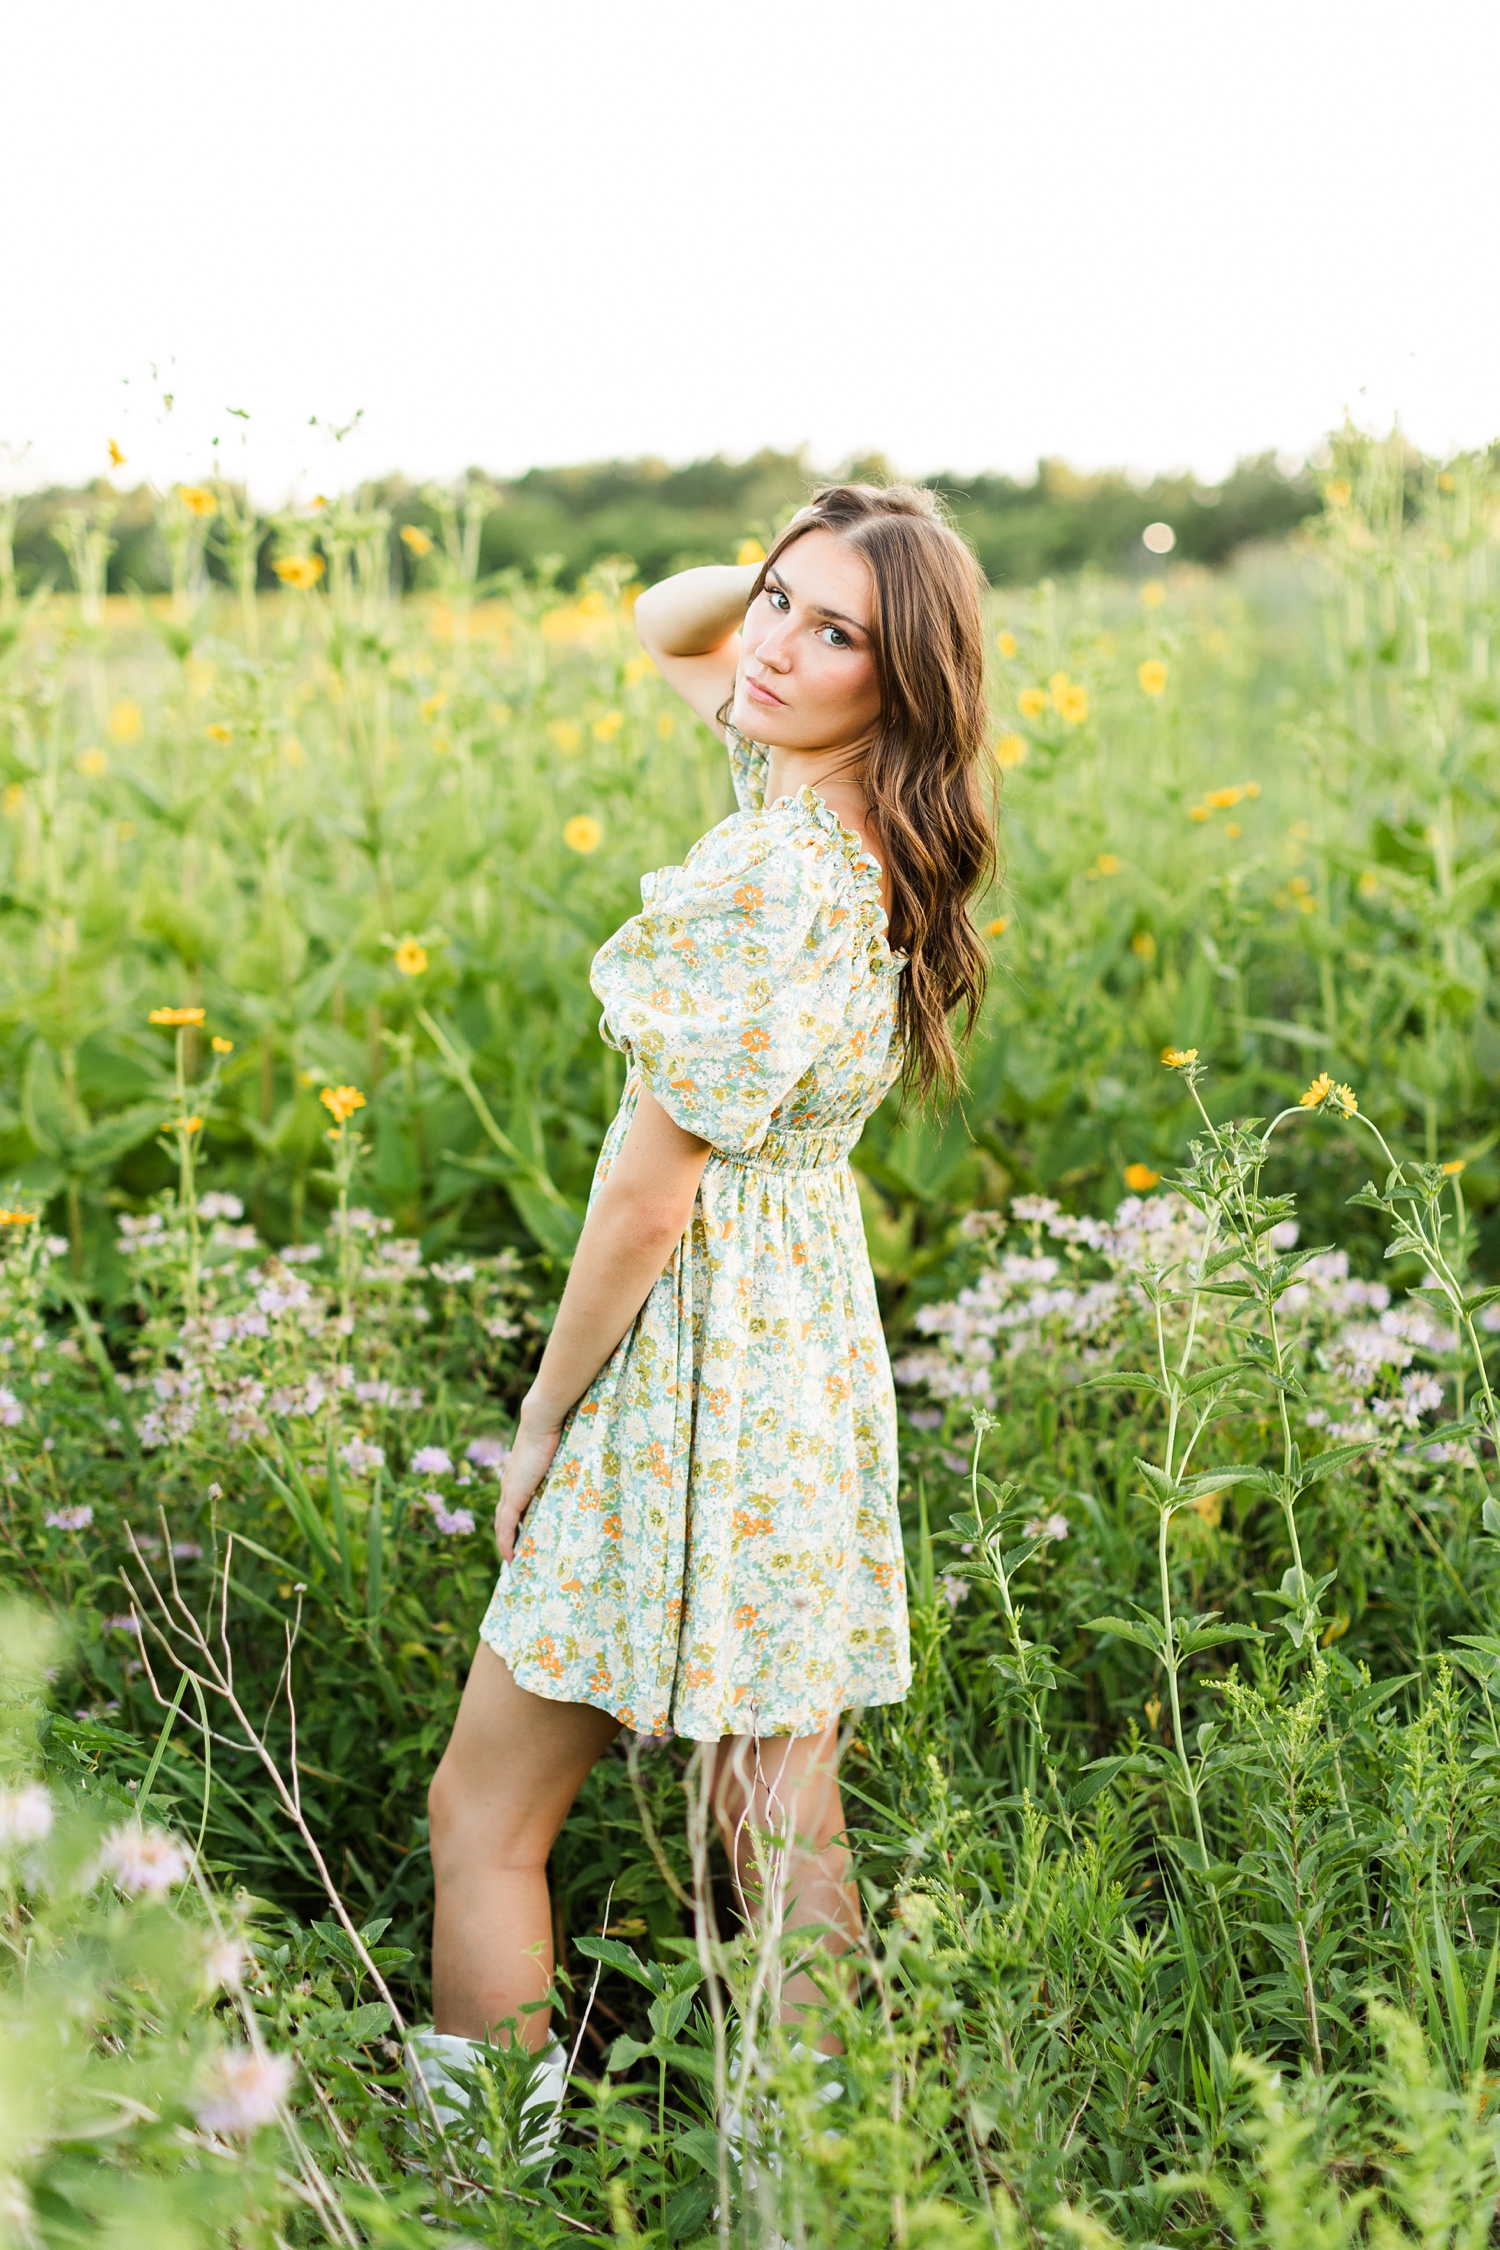 Mallory looks over her shoulder while standing in a field of yellow wildflowers wearing a green and yellow floral dress | CB Studio